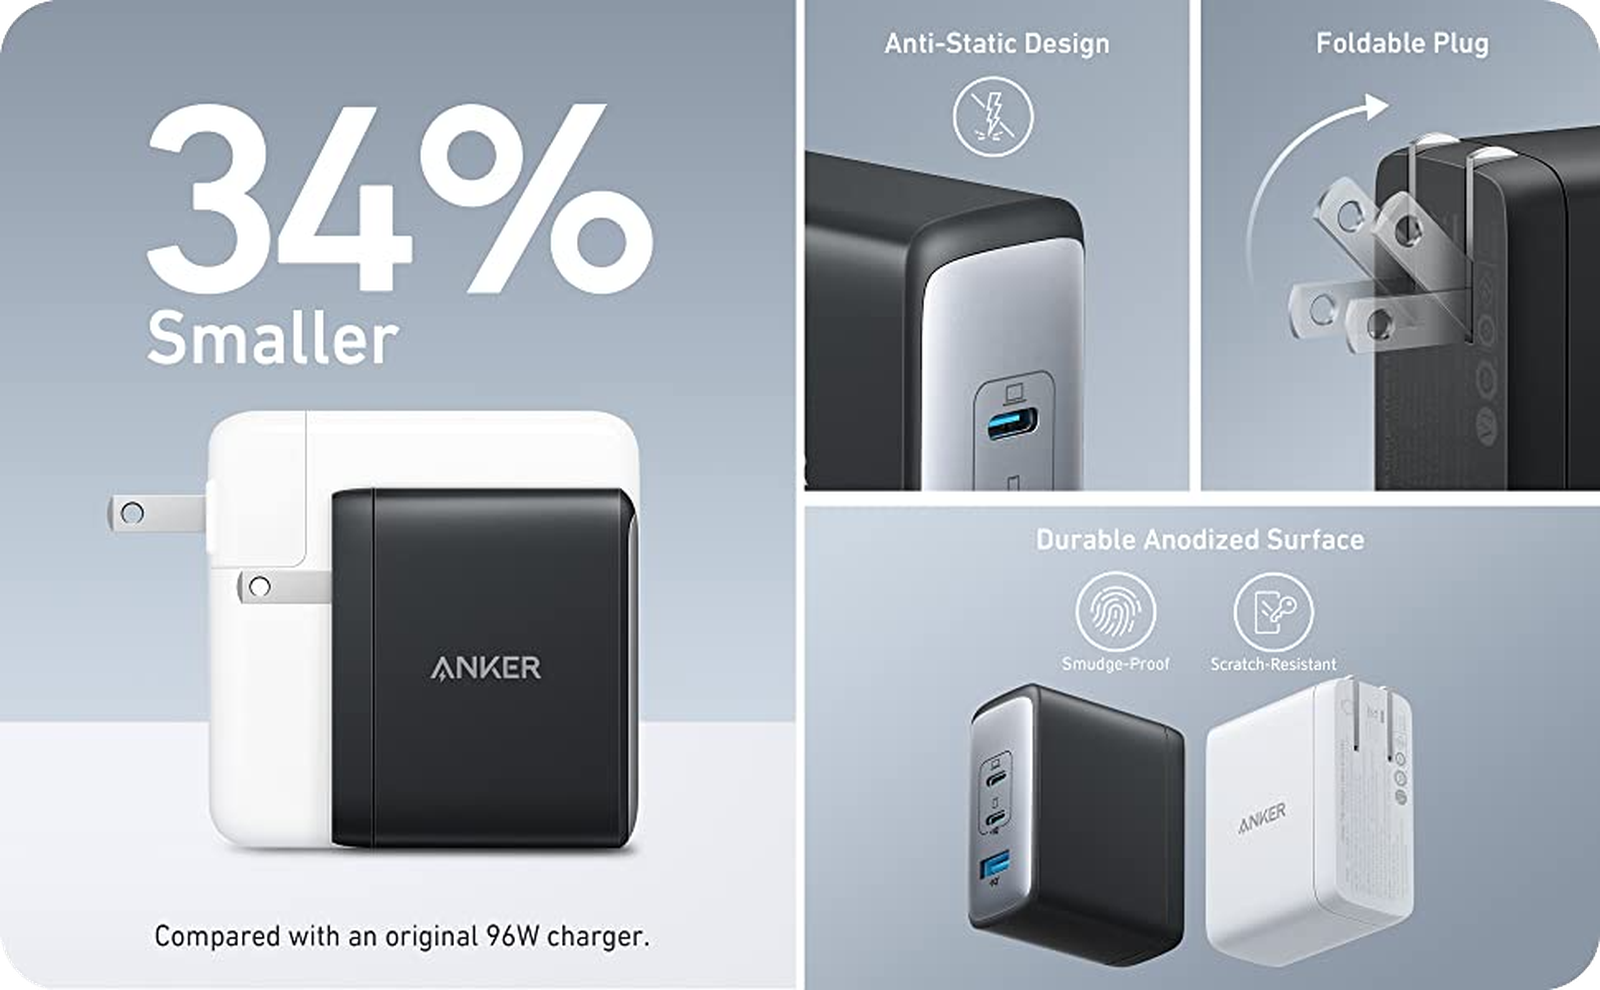 Anker's New 100W GaN Charger Features Three USB Ports, 34% Smaller